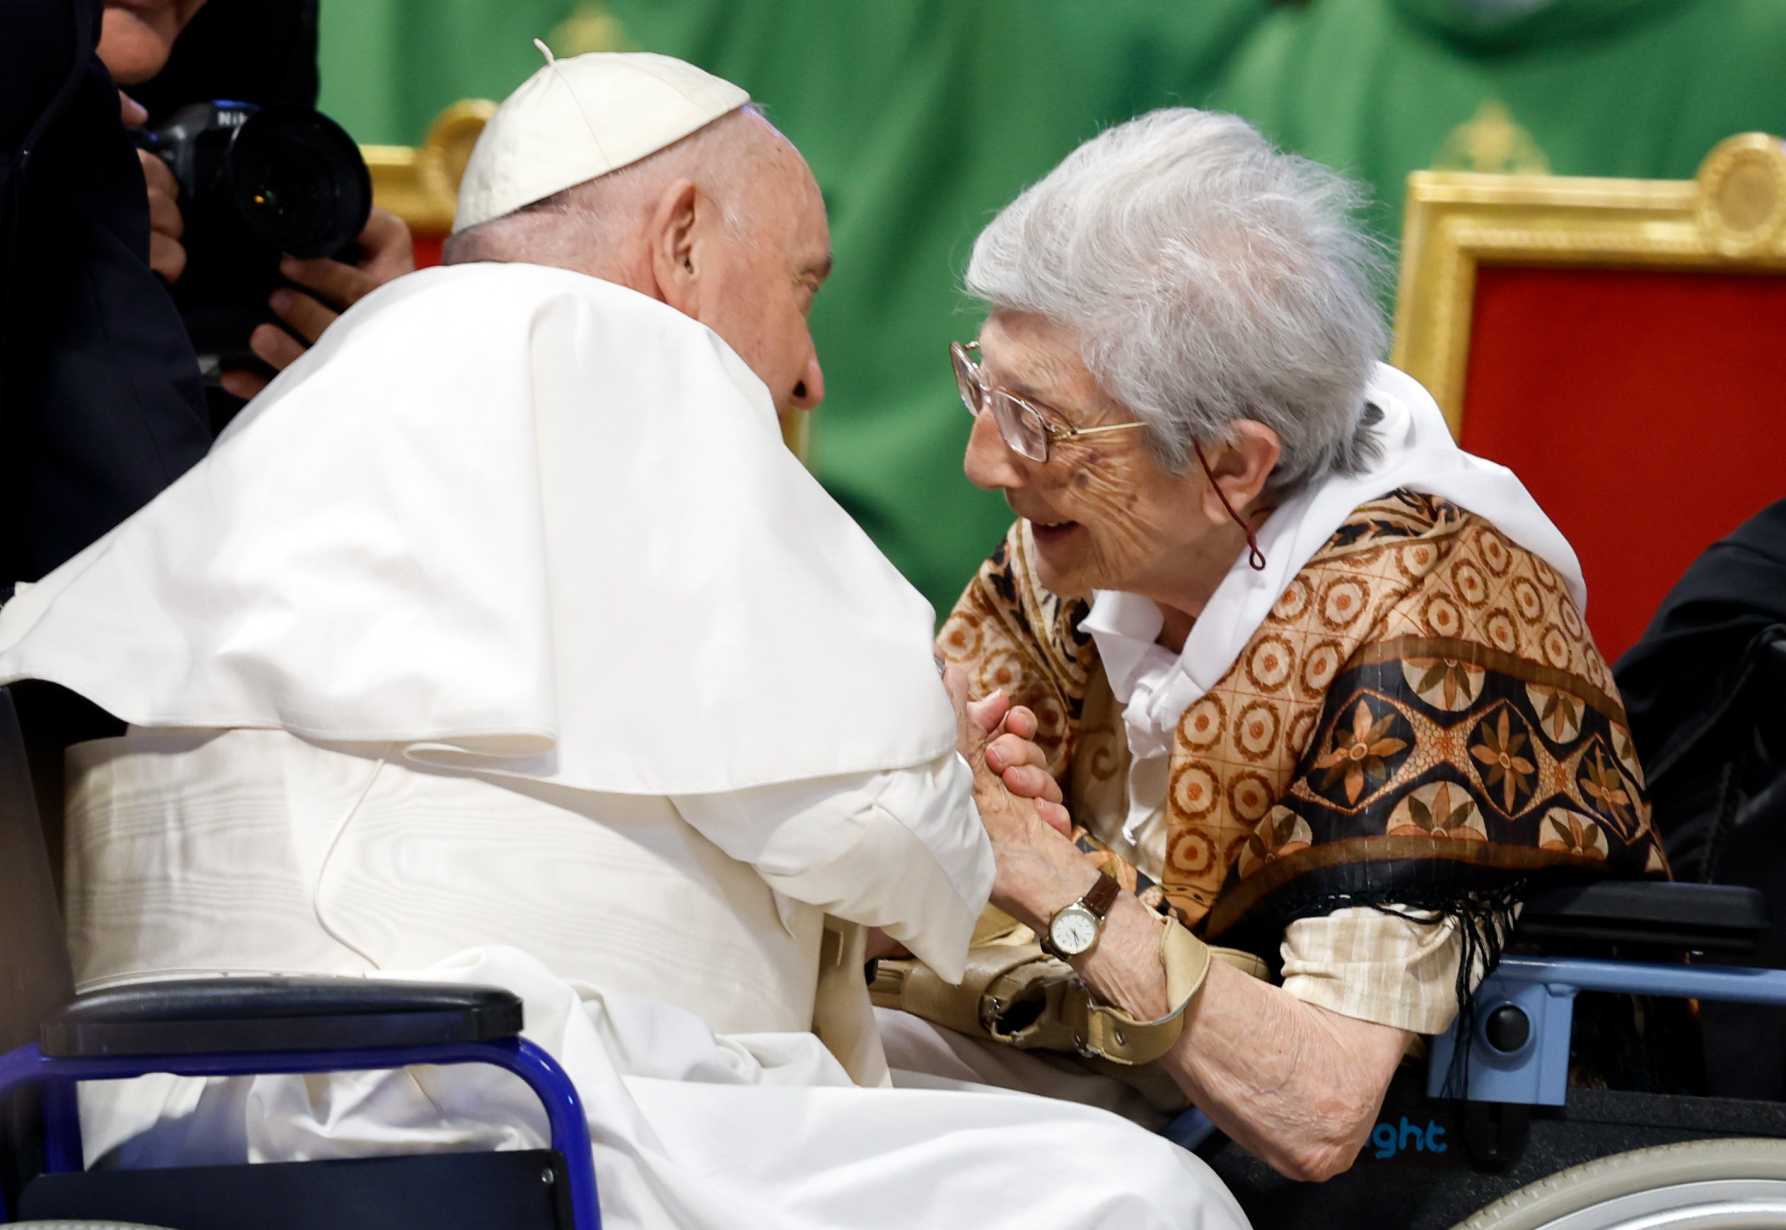 Pope appeals for end to weapons' production, for solidarity with the elderly